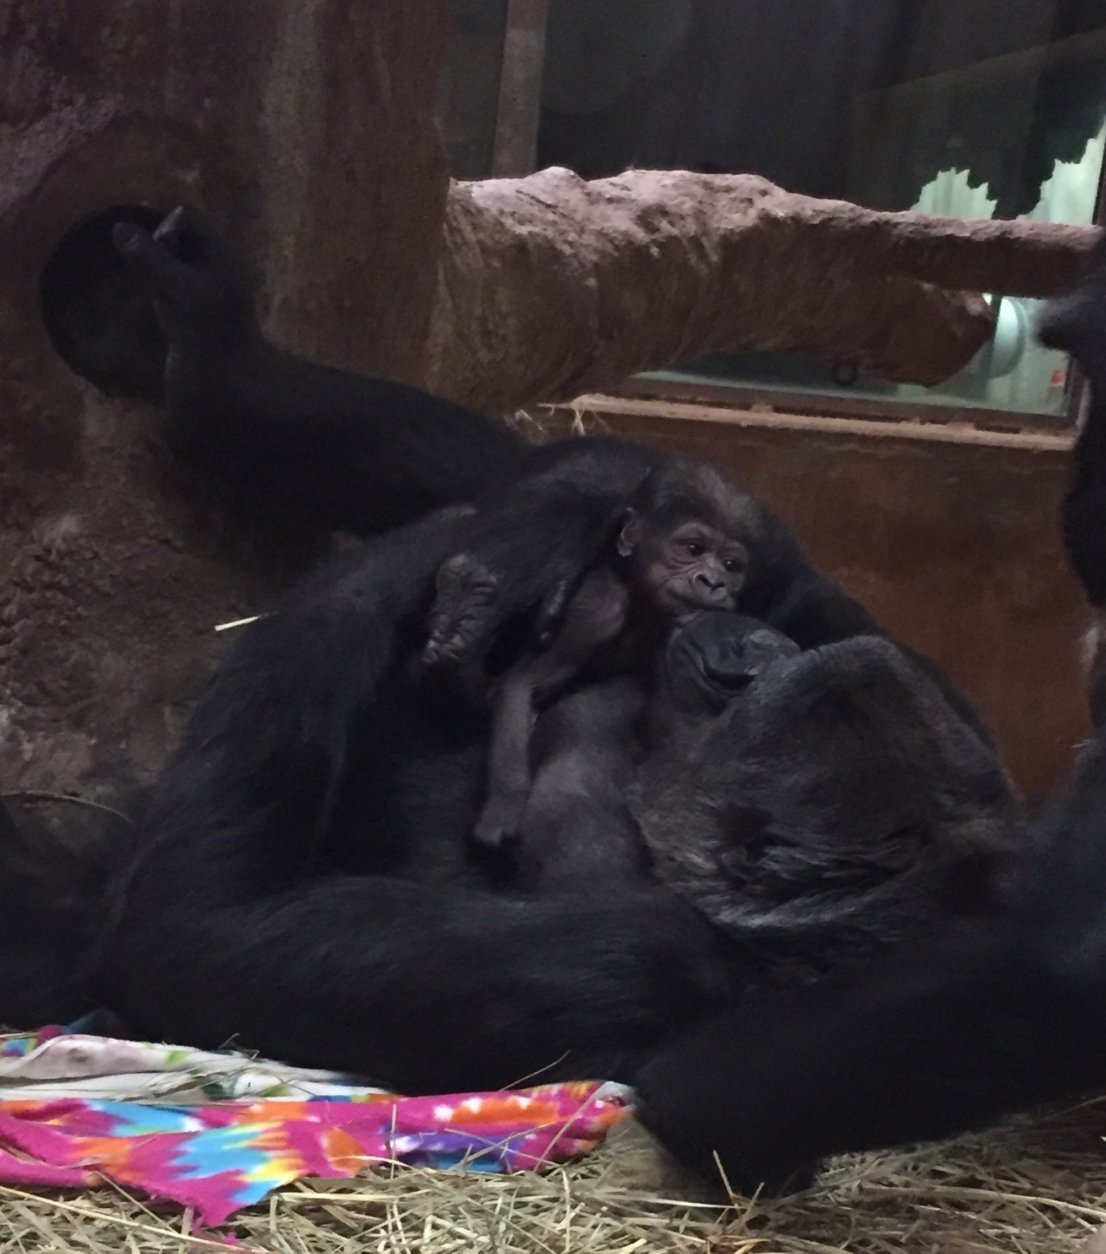 Calaya and her infant Moke in the Great Ape House at the Smithsonian’s National Zoo. (Matt Spence, Smithsonian’s National Zoo)